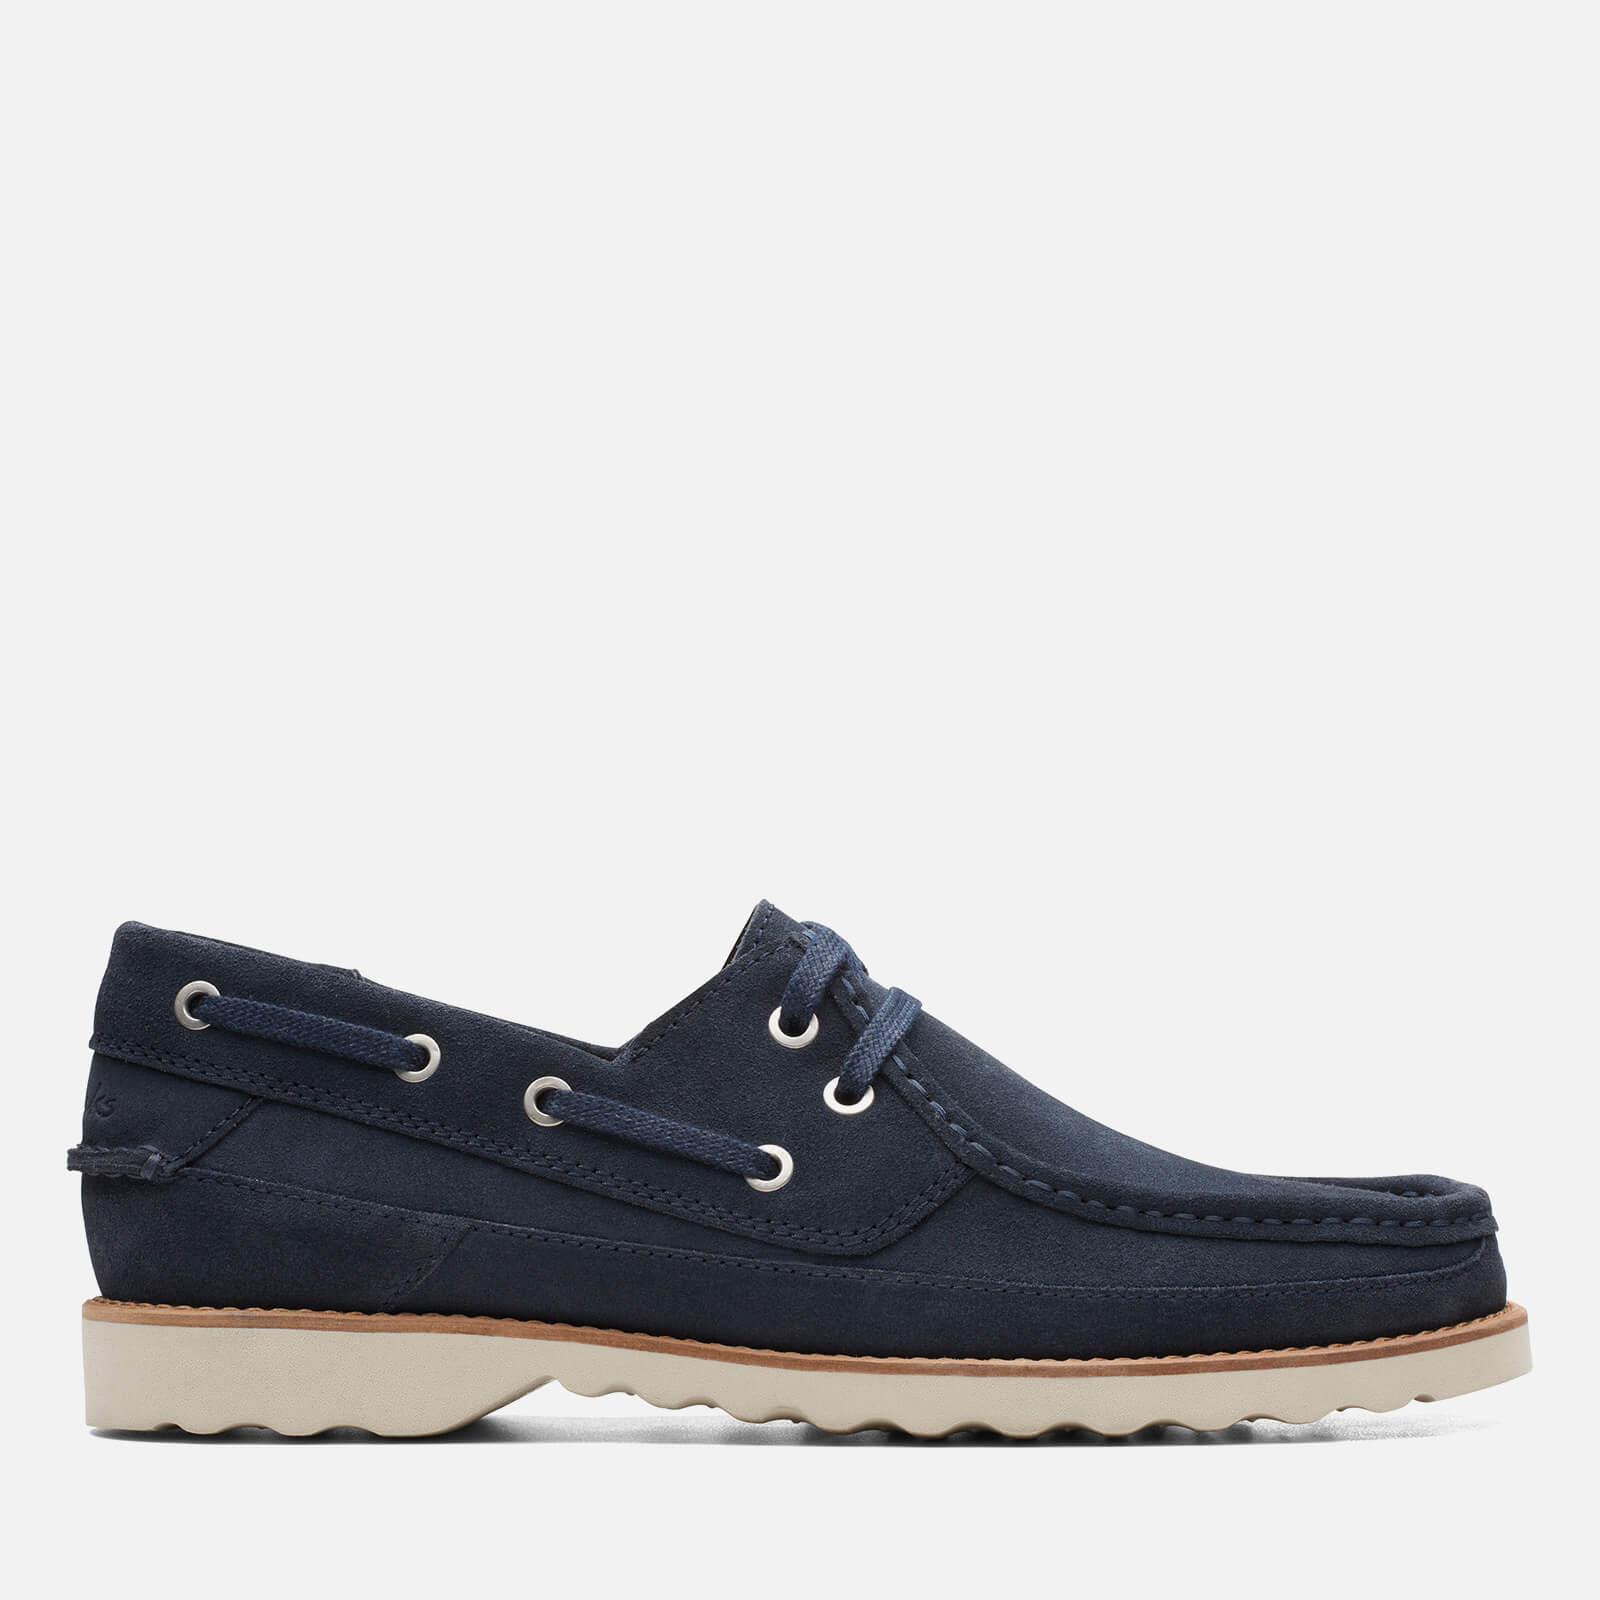 clarks men's durleigh sail suede boat shoes - navy - uk 10